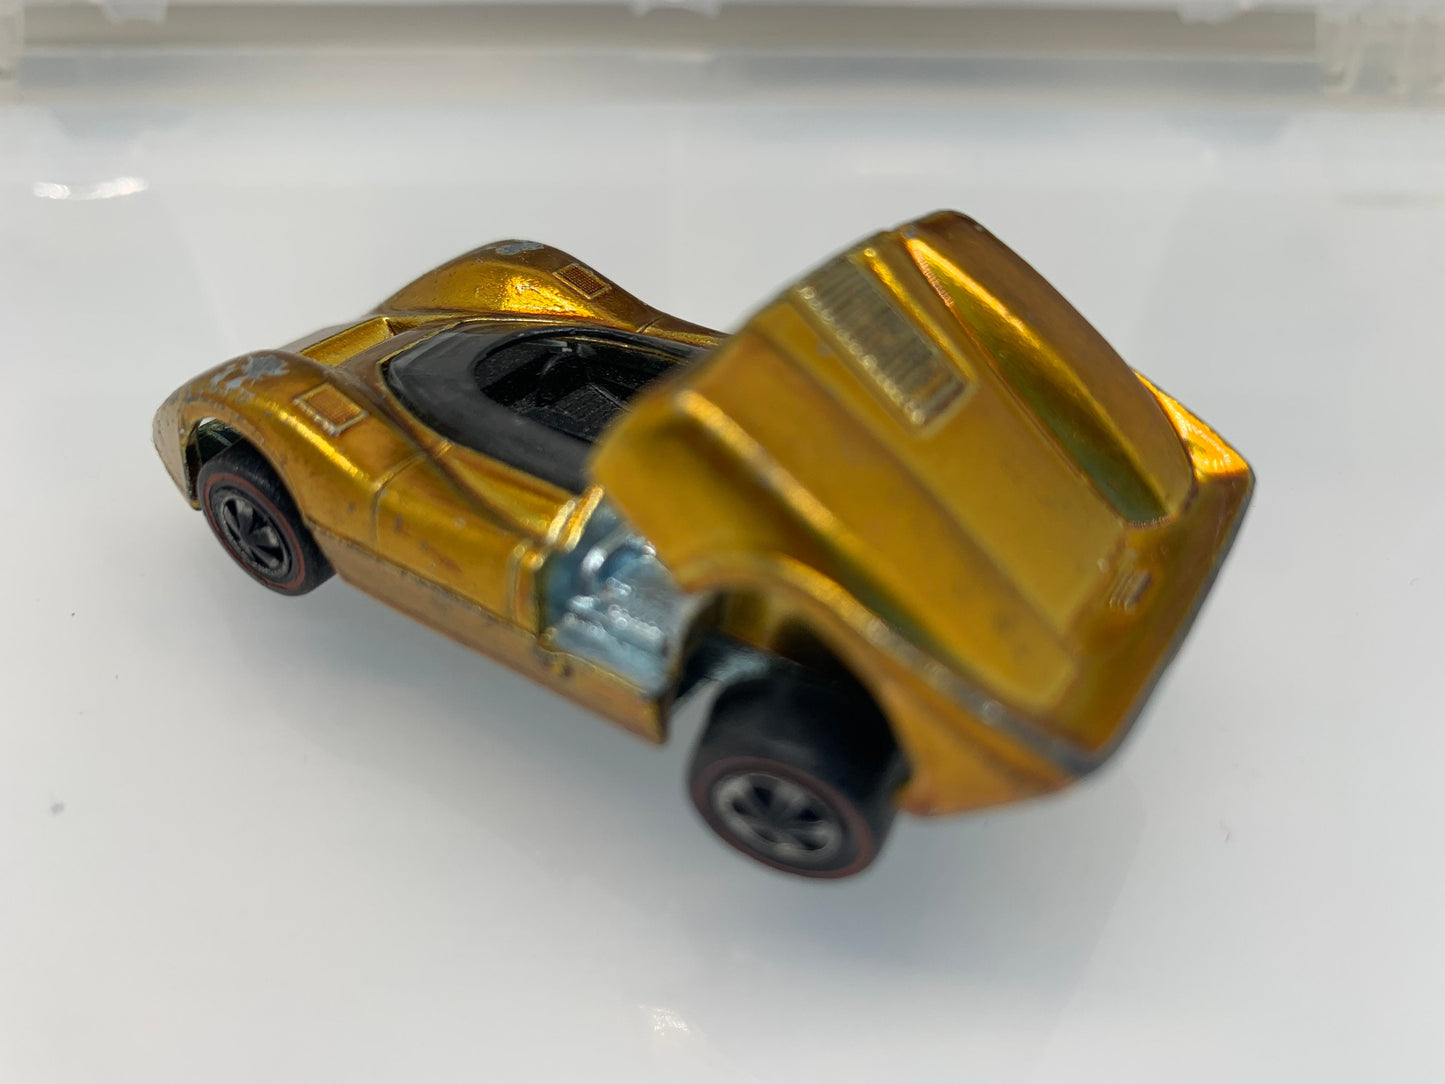 1969 Redline McLaren M6A Gold Hot Wheels Collectable Scale Model Miniature Toy Car Perfect Birthday Gift